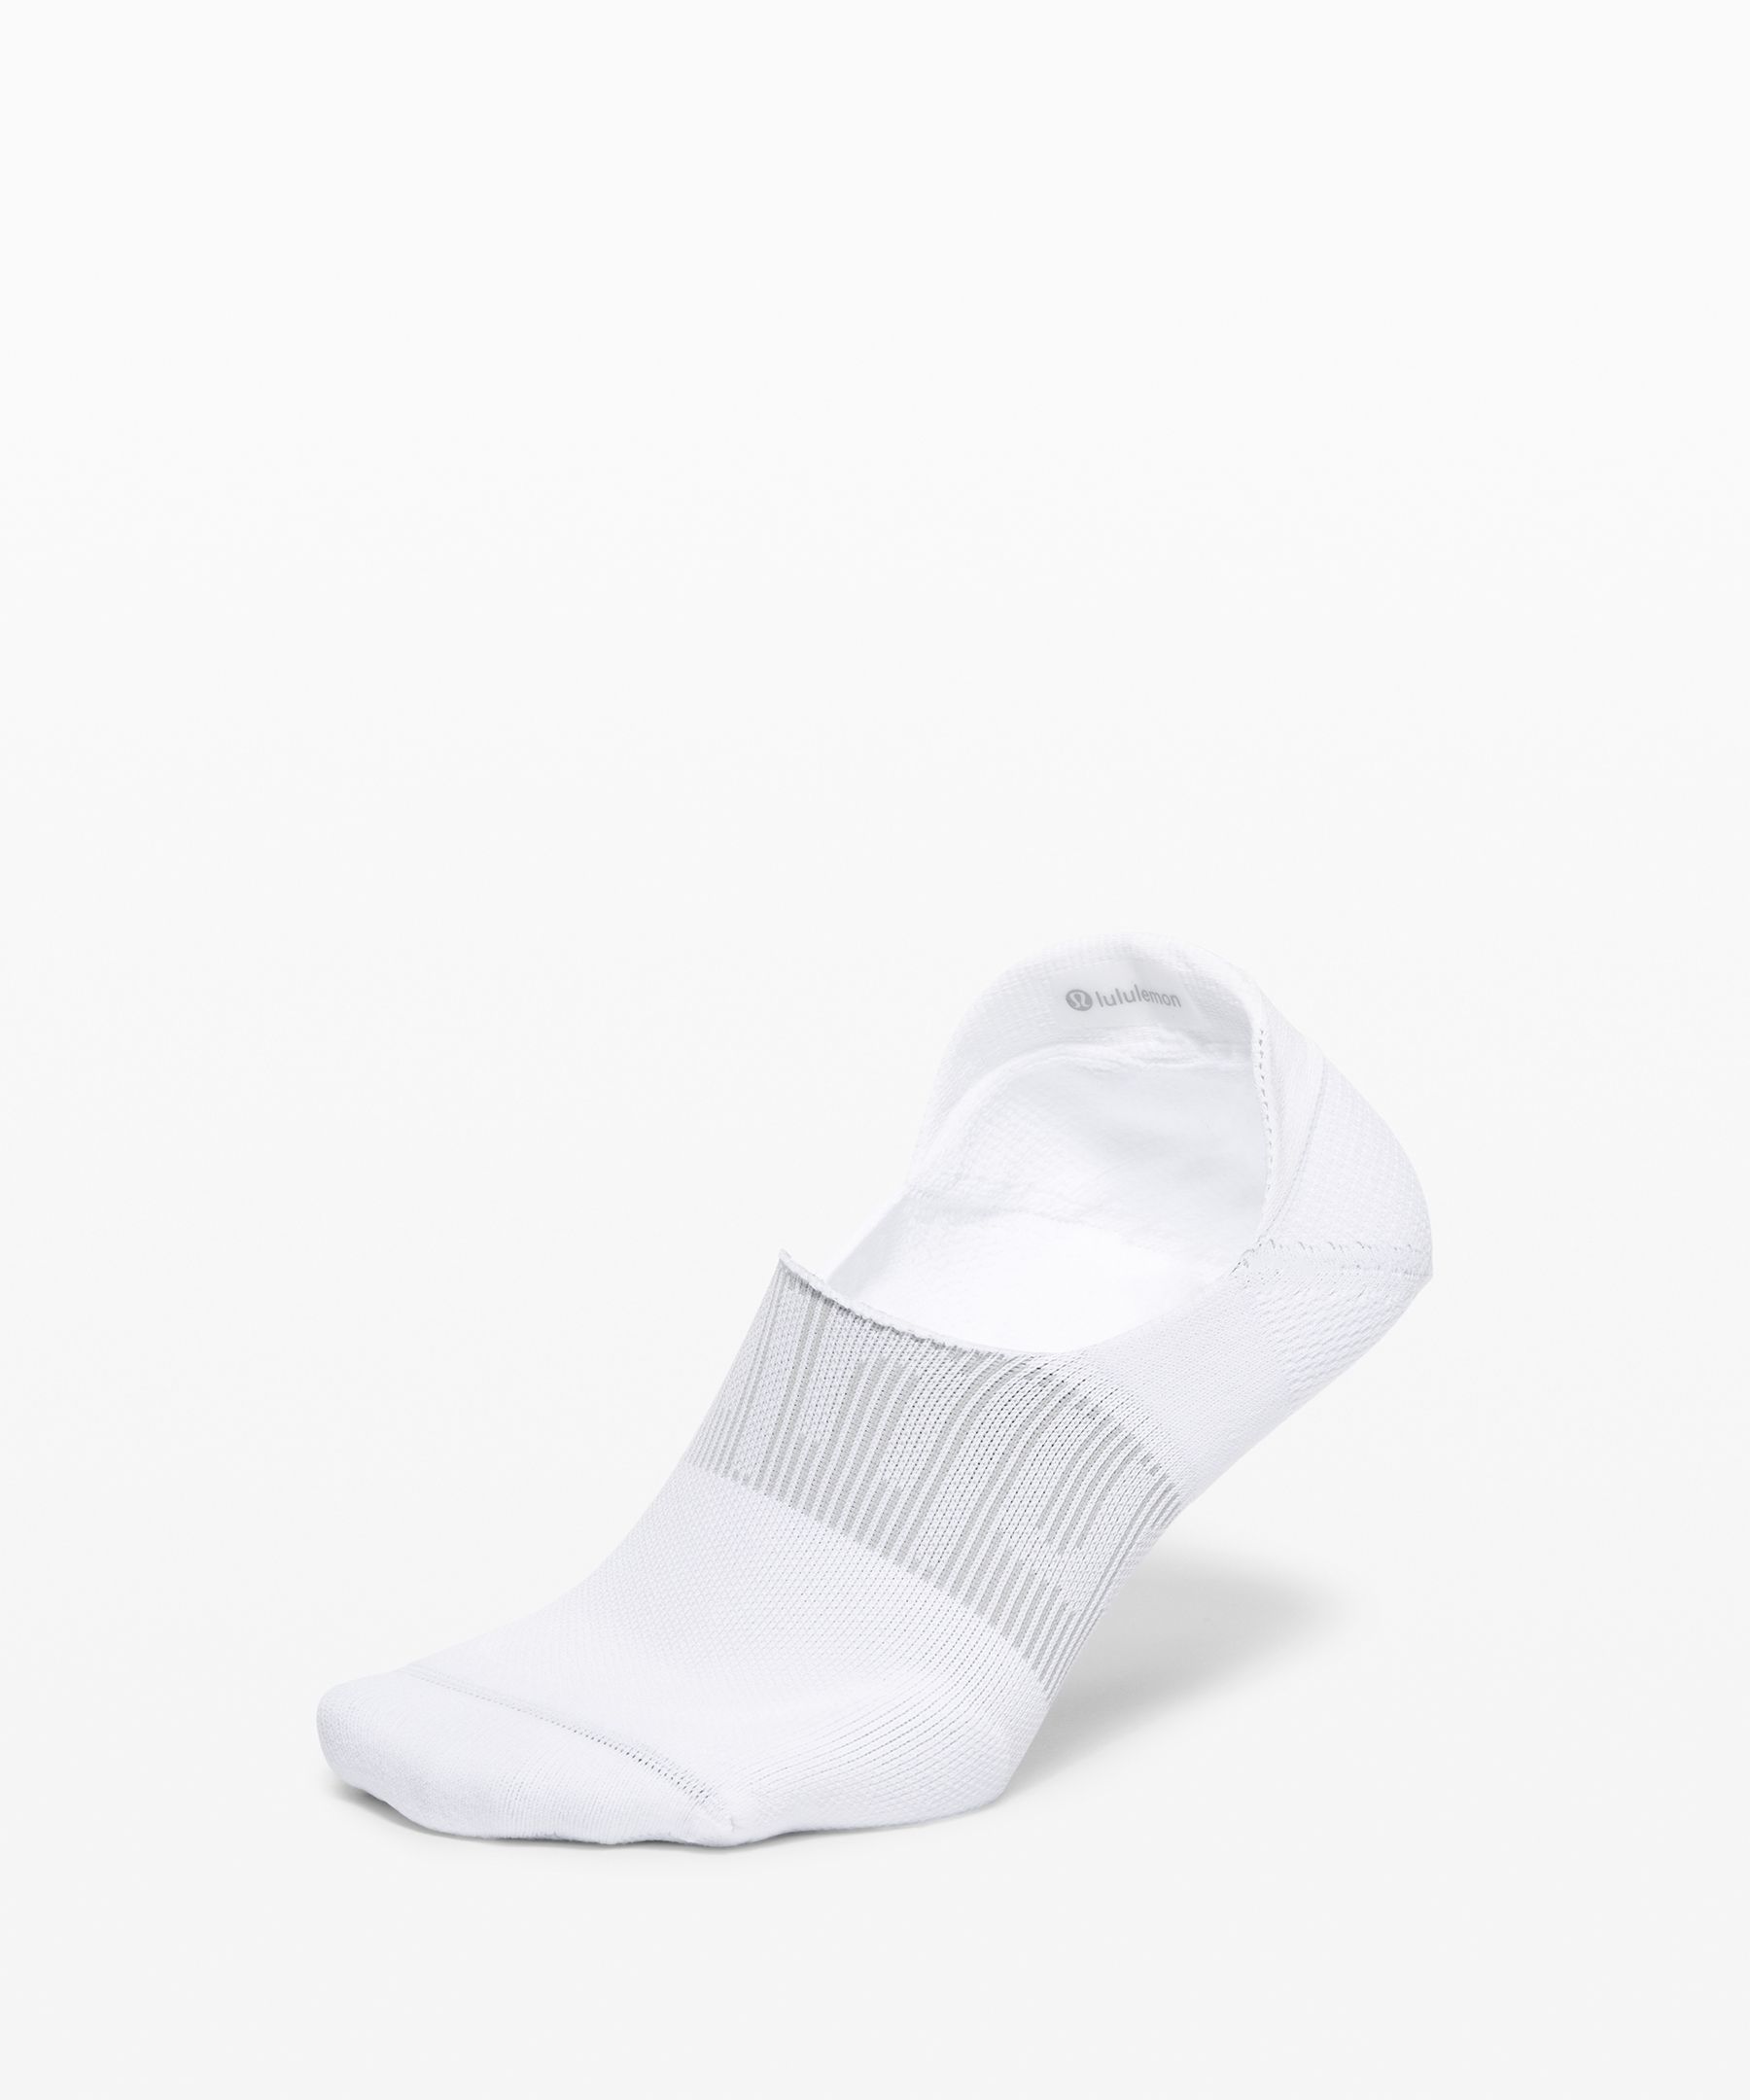 Power Stride No-Show Sock with Active Grip | Lululemon NZ